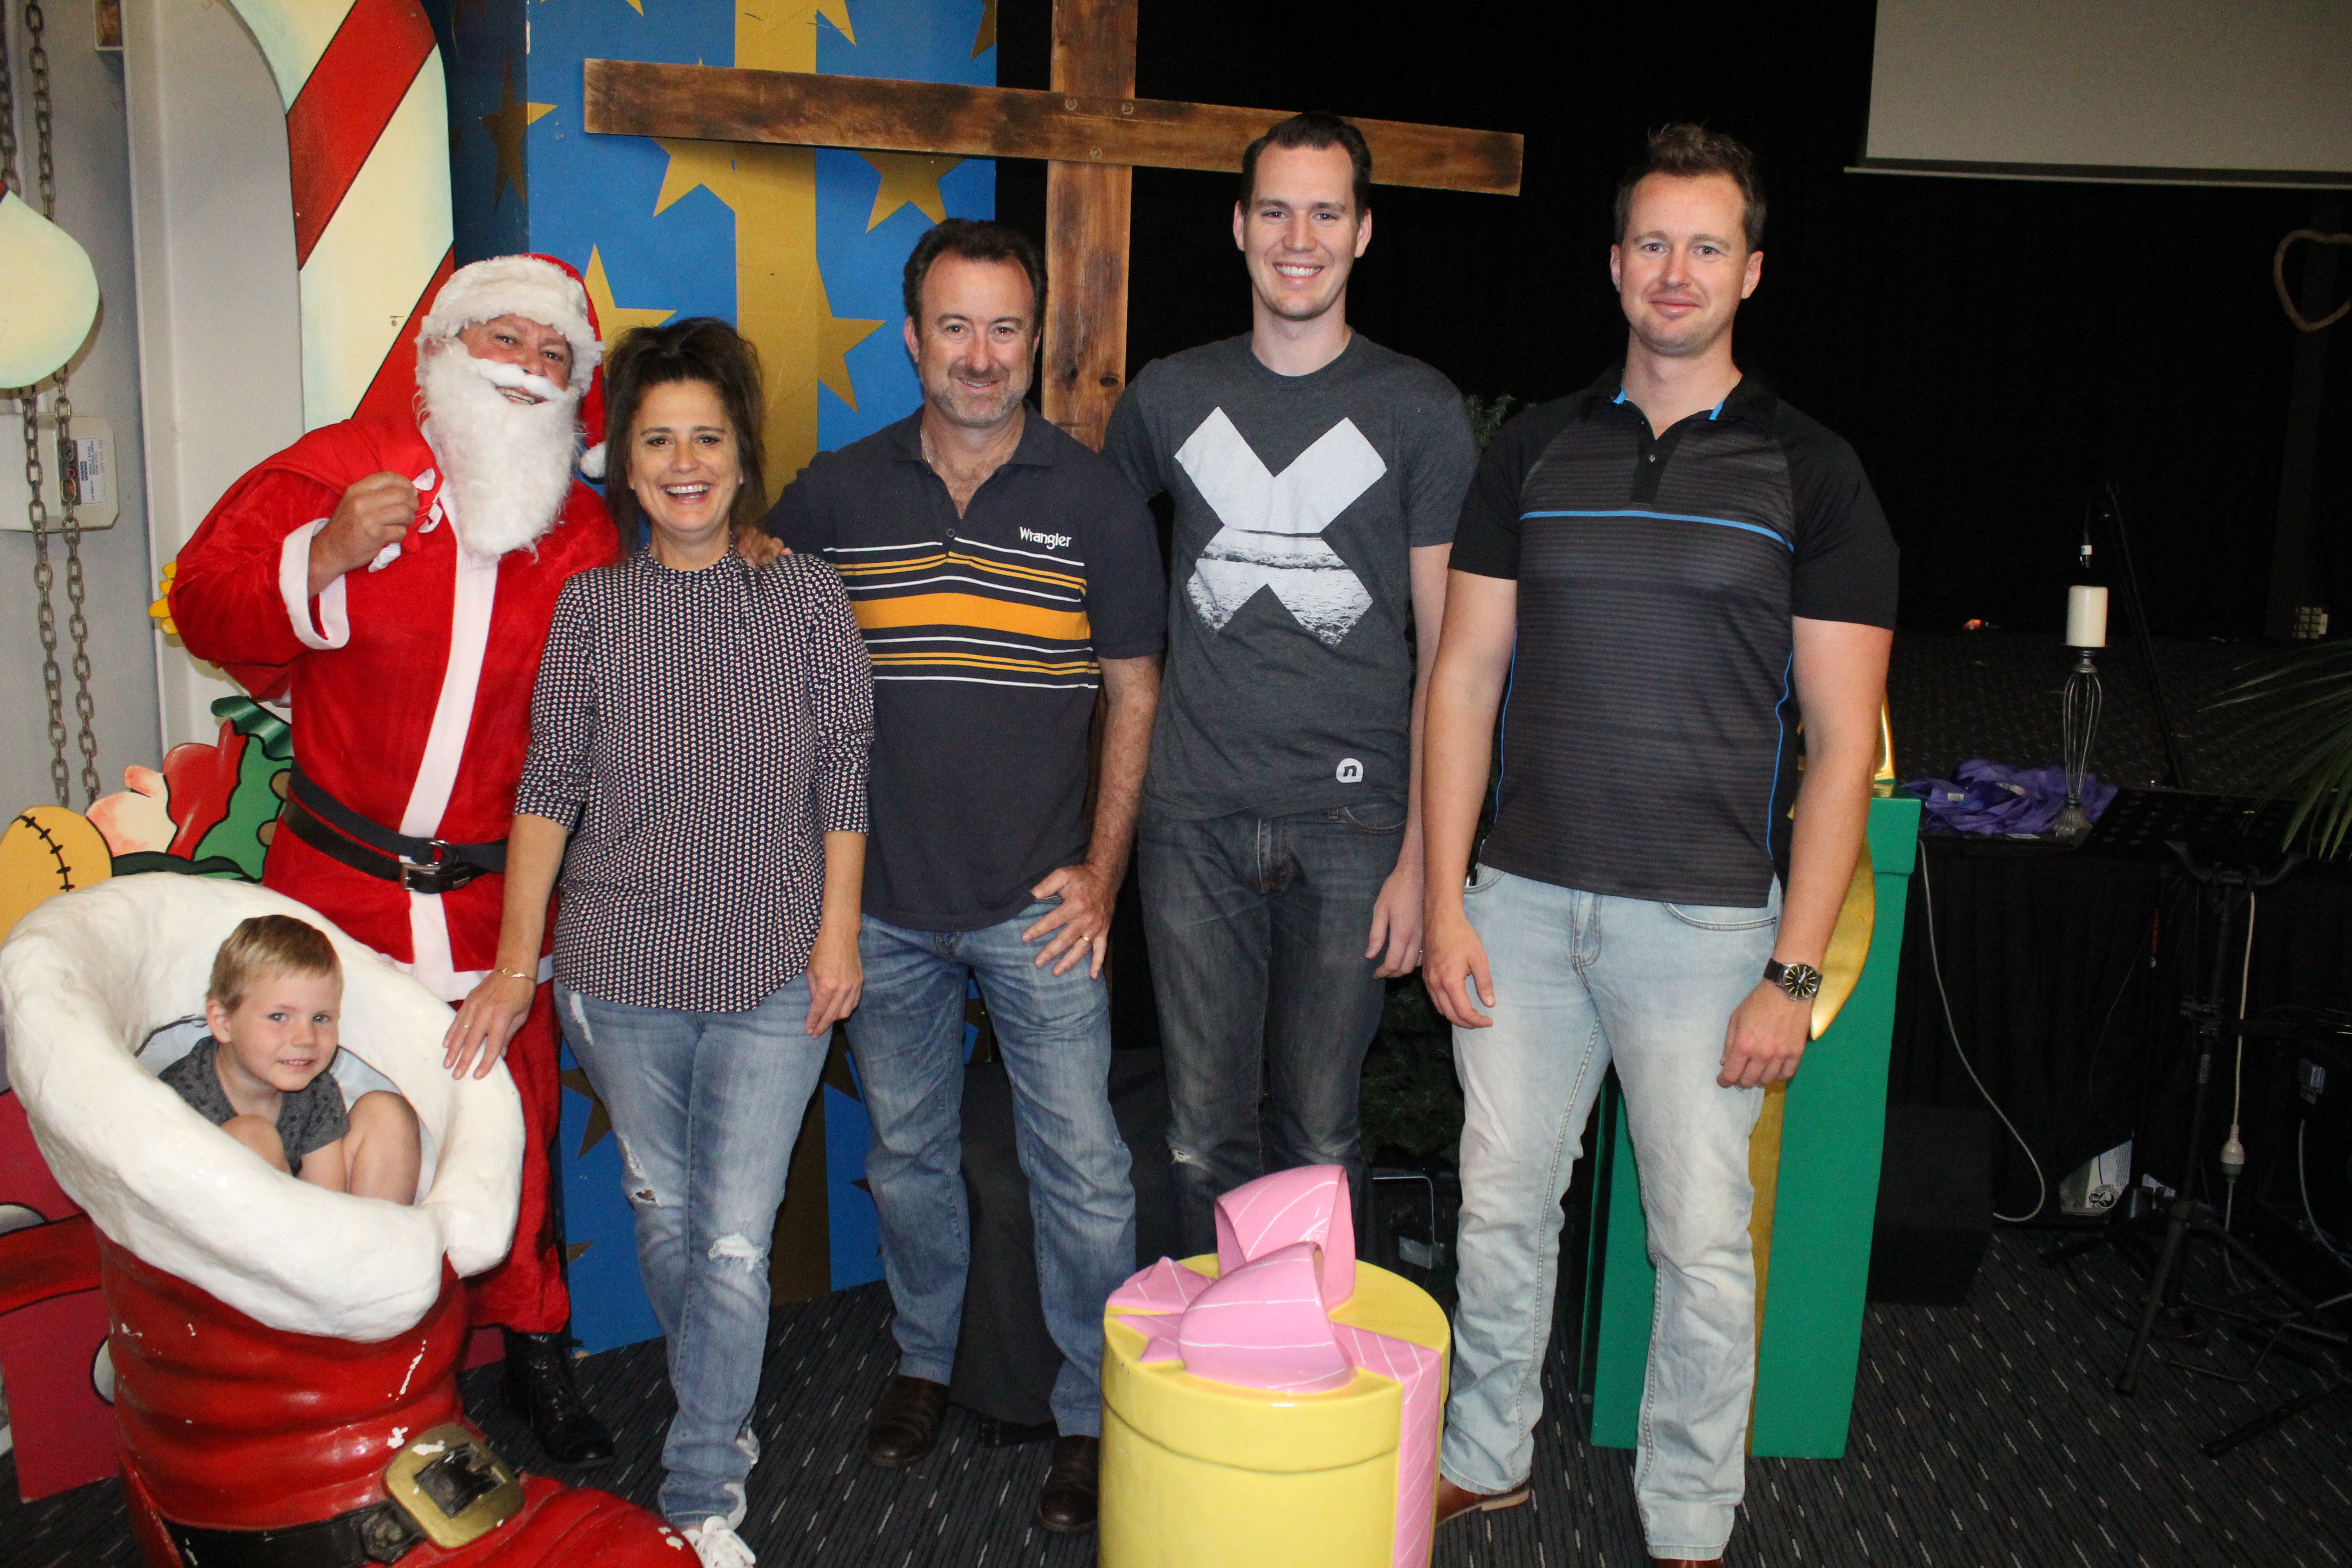 The committee organising the Carols in the Bay:
Frank Future, Cindy Eick, Bill Brill, Anyerin Drury, John Archer with Noah Drury in Santa’s boot. Photo by: Jewell Drury
